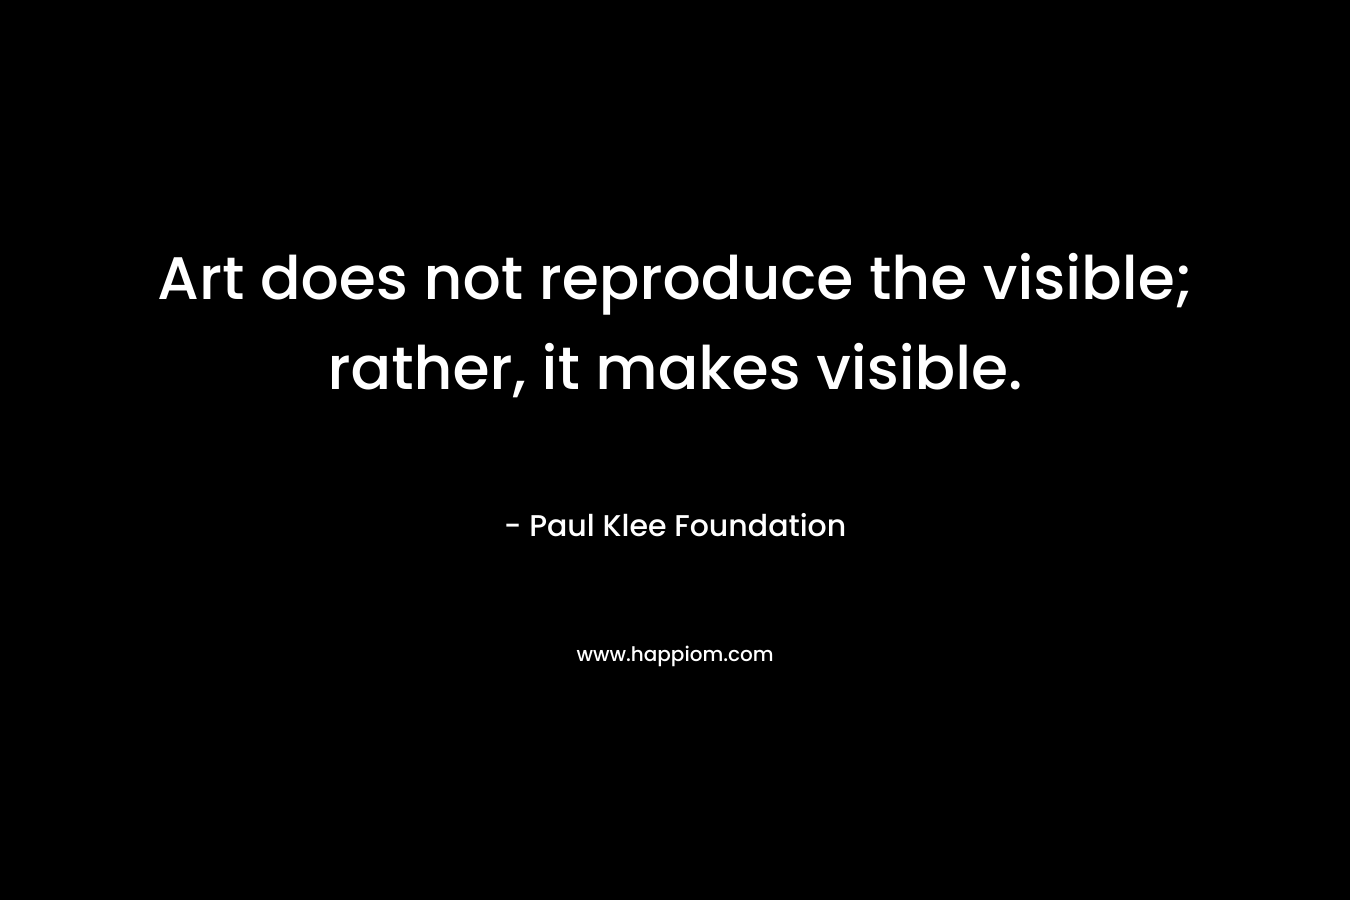 Art does not reproduce the visible; rather, it makes visible.